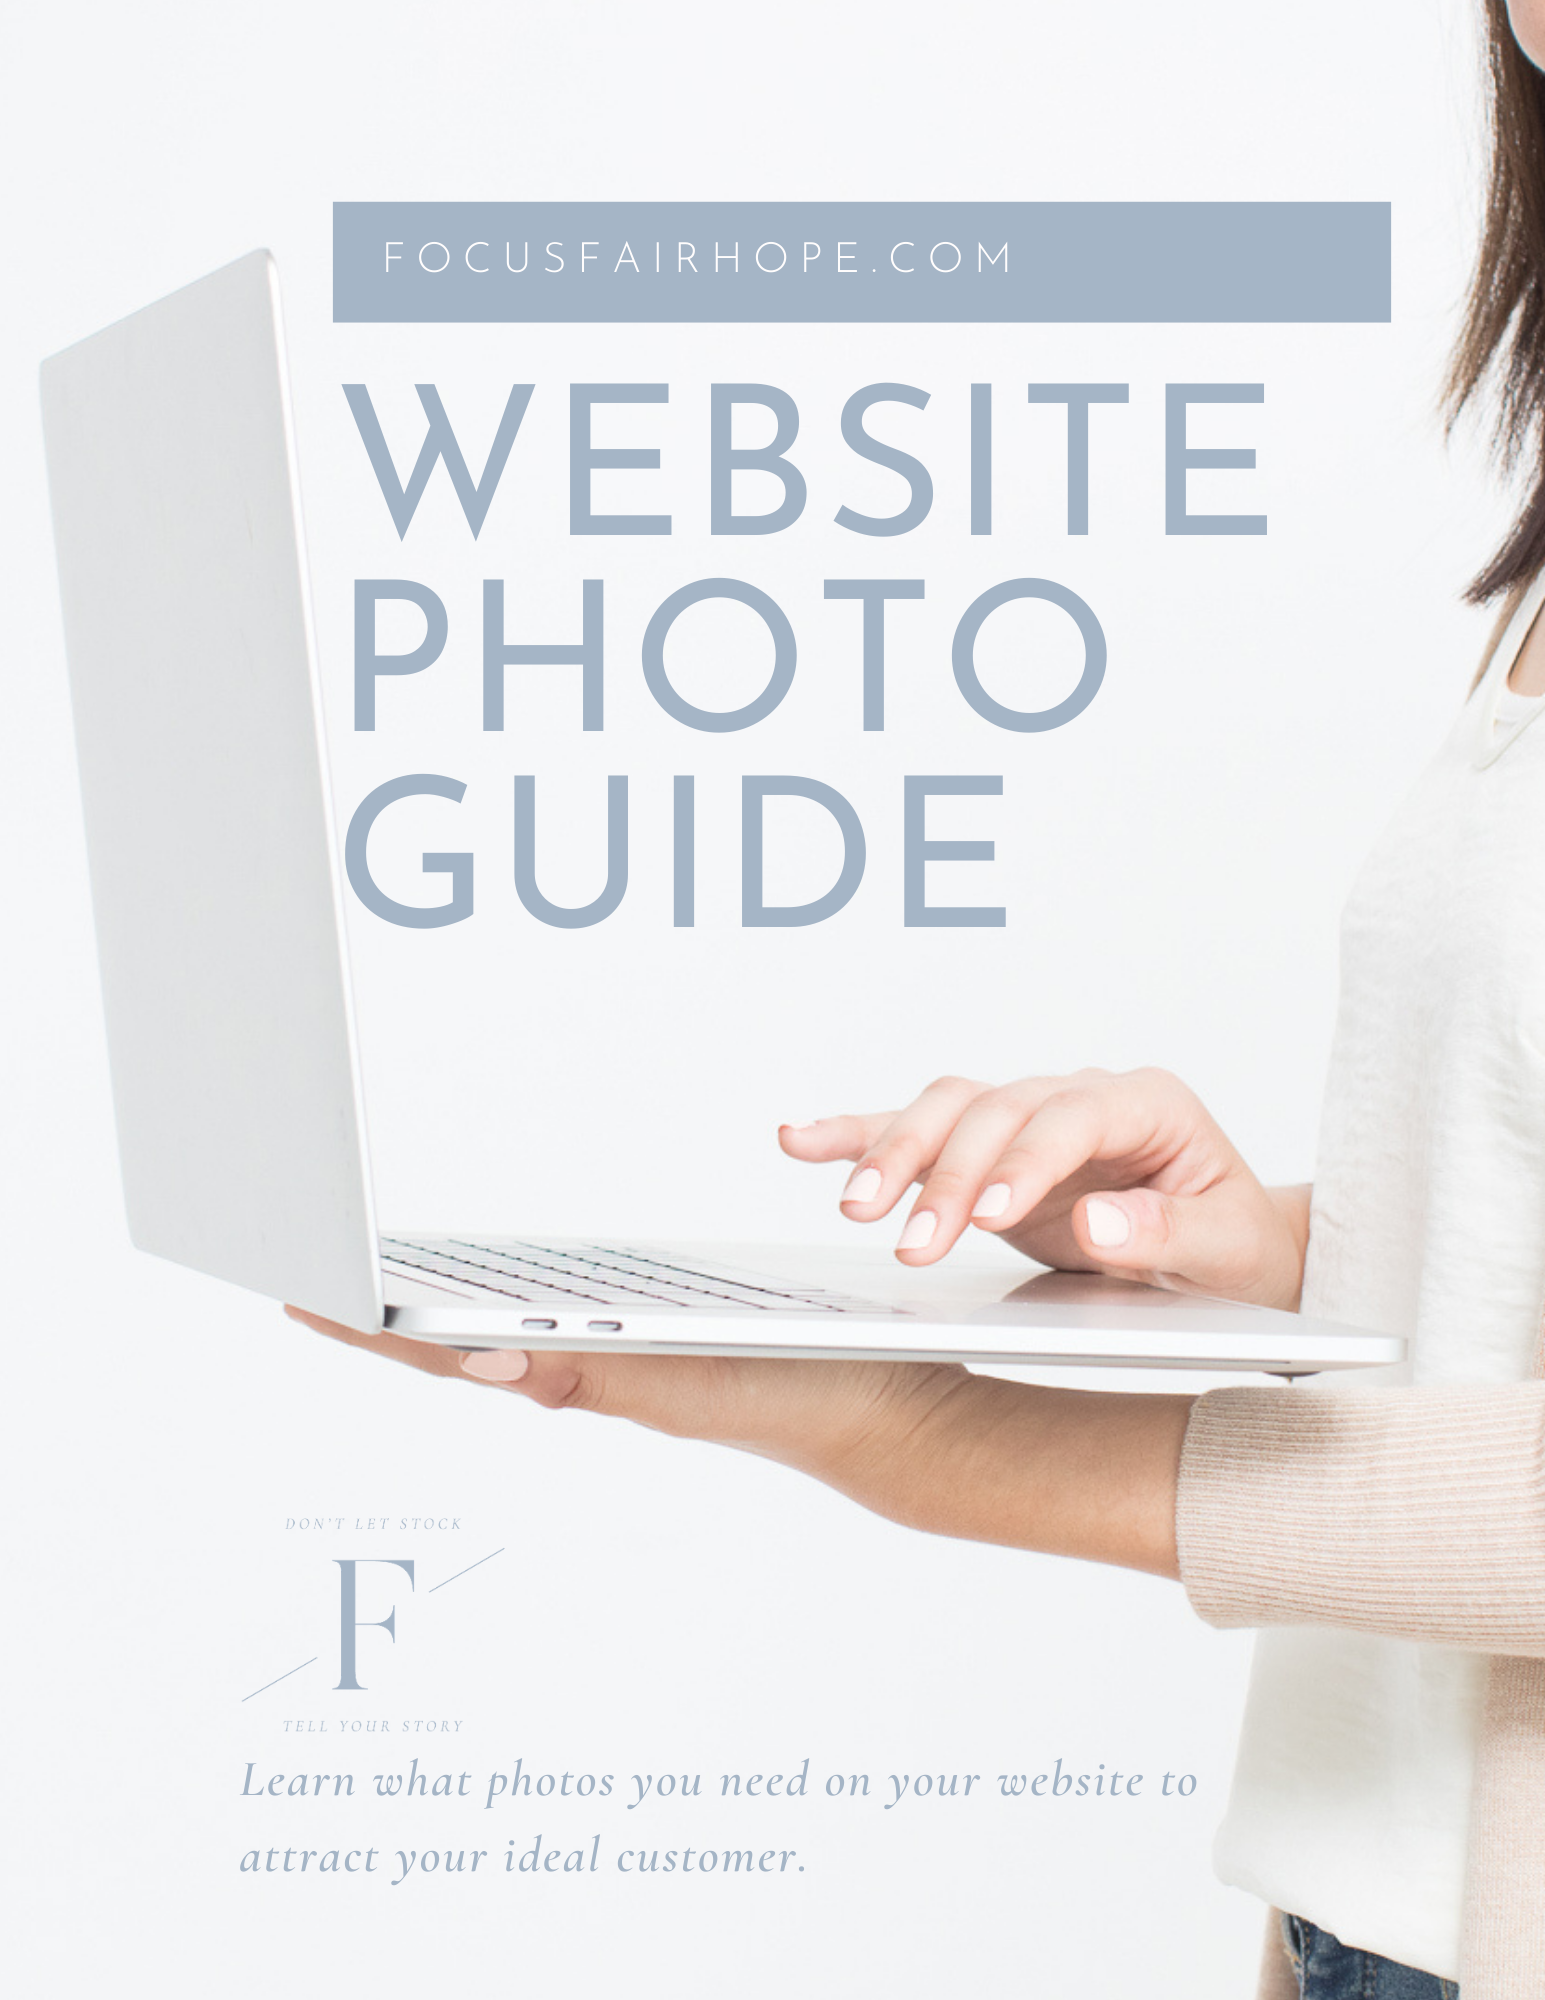 Does your website represent your brand?